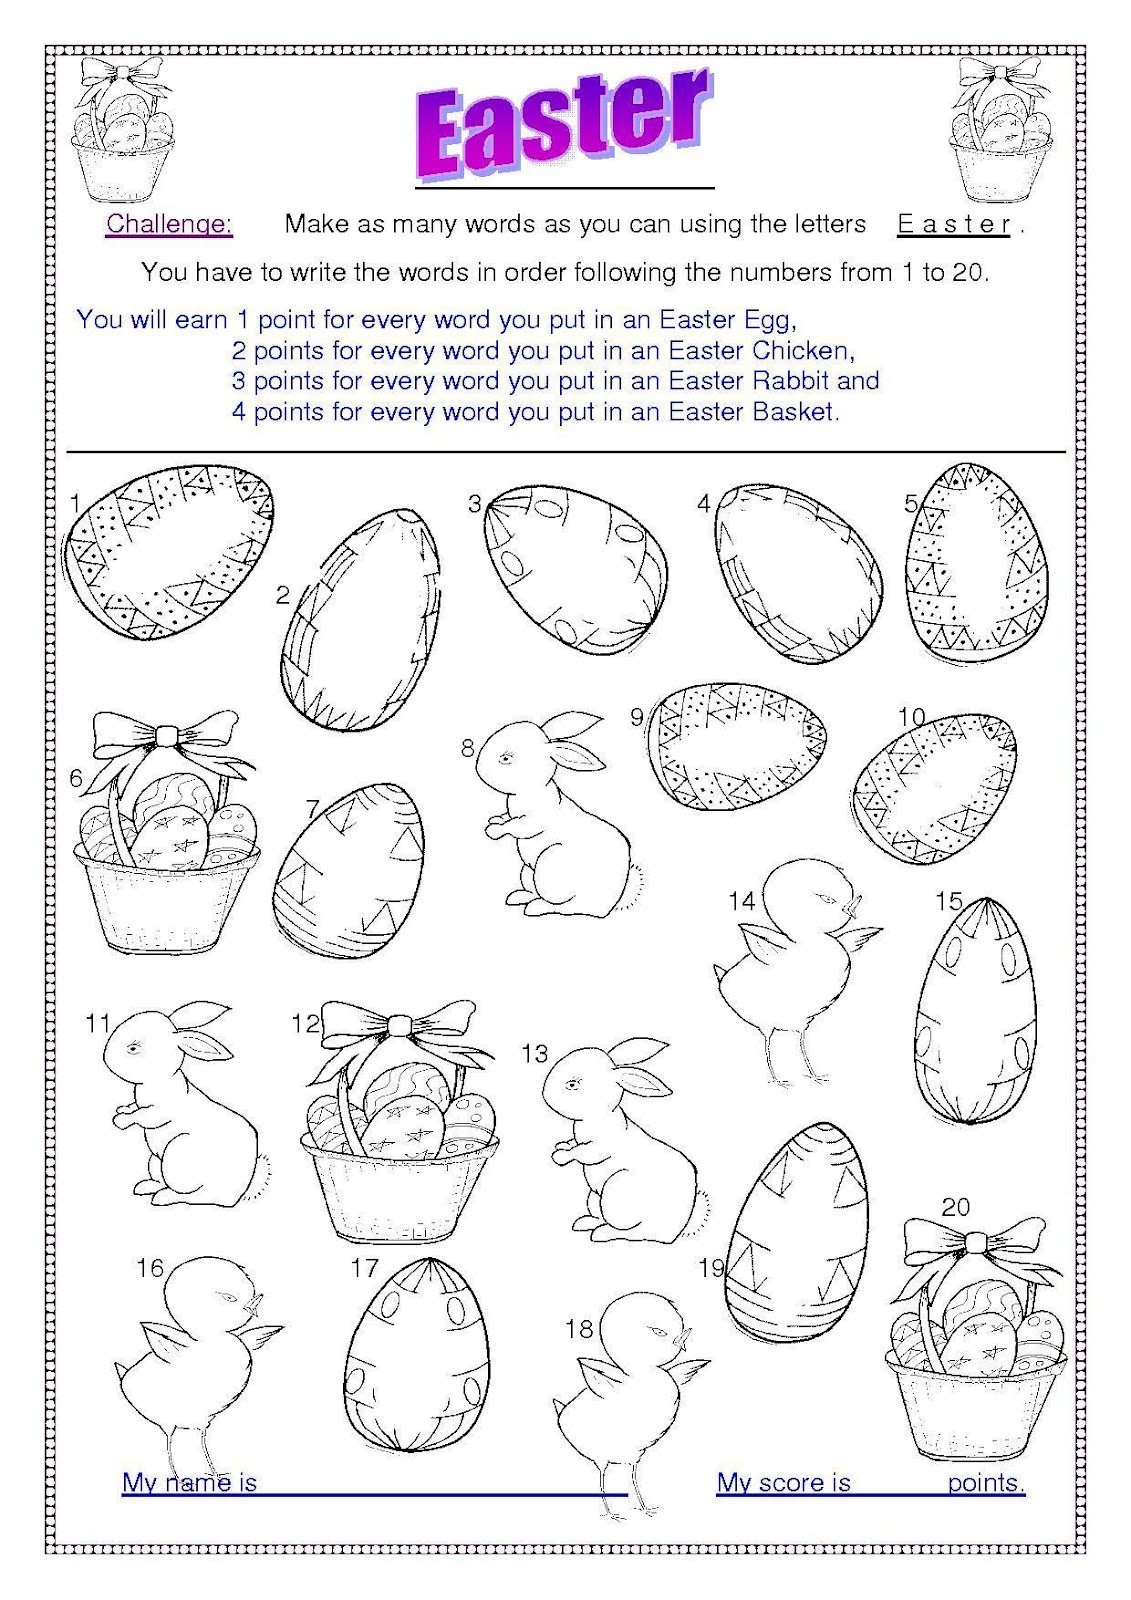 free-easter-printable-activity-sheets-printable-templates